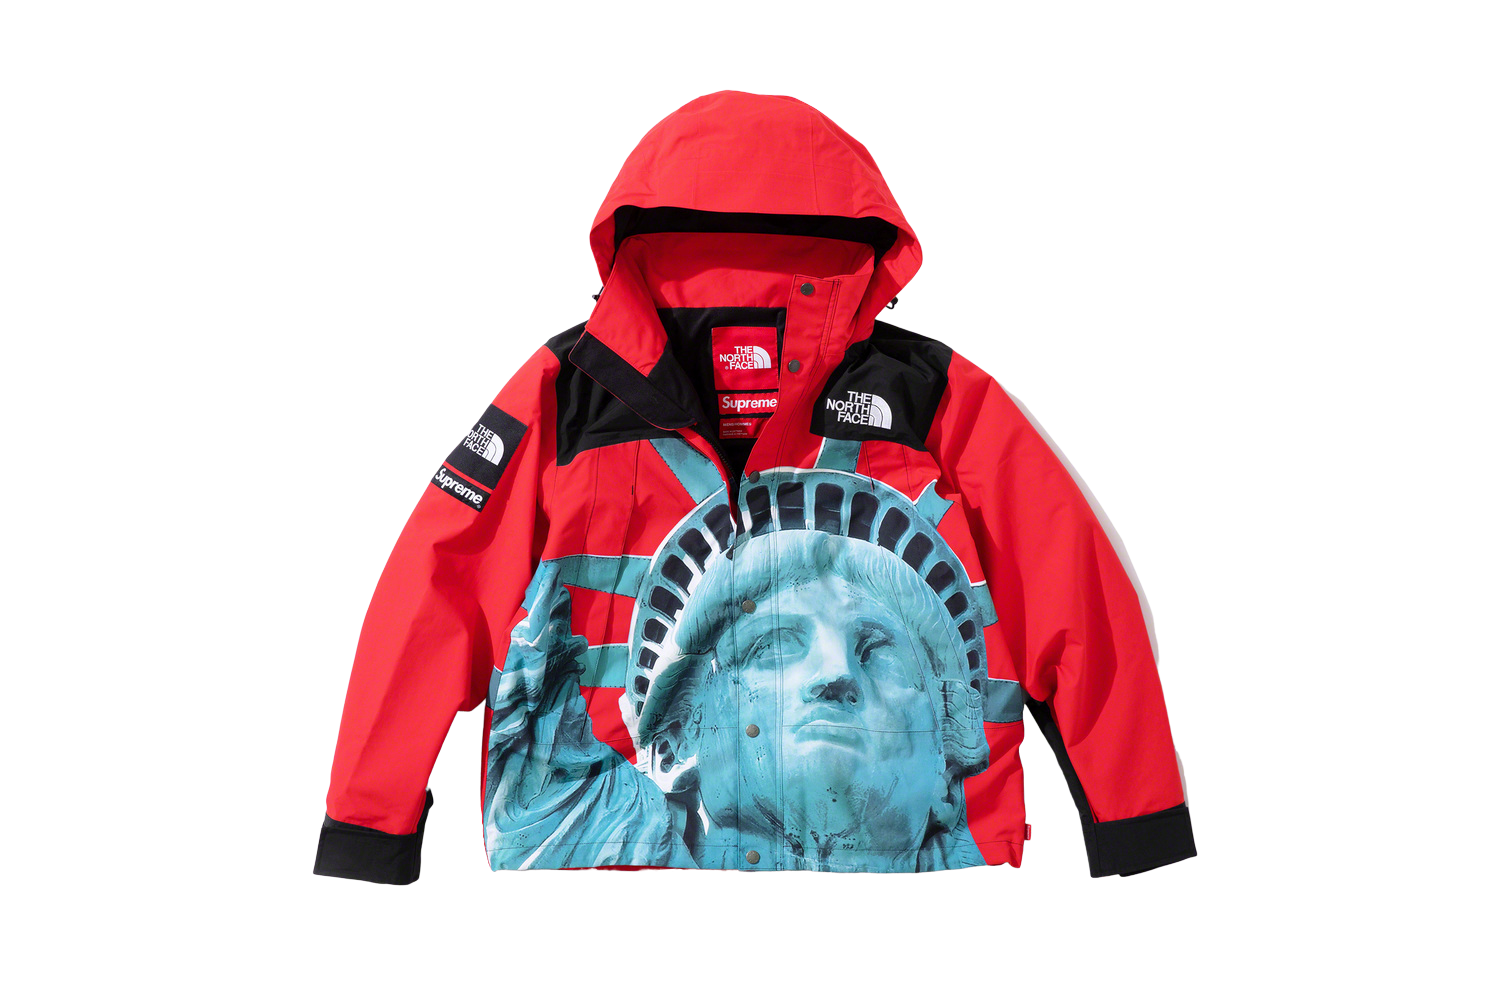 The North Face Statue of Liberty Mountain Jacket - fall winter